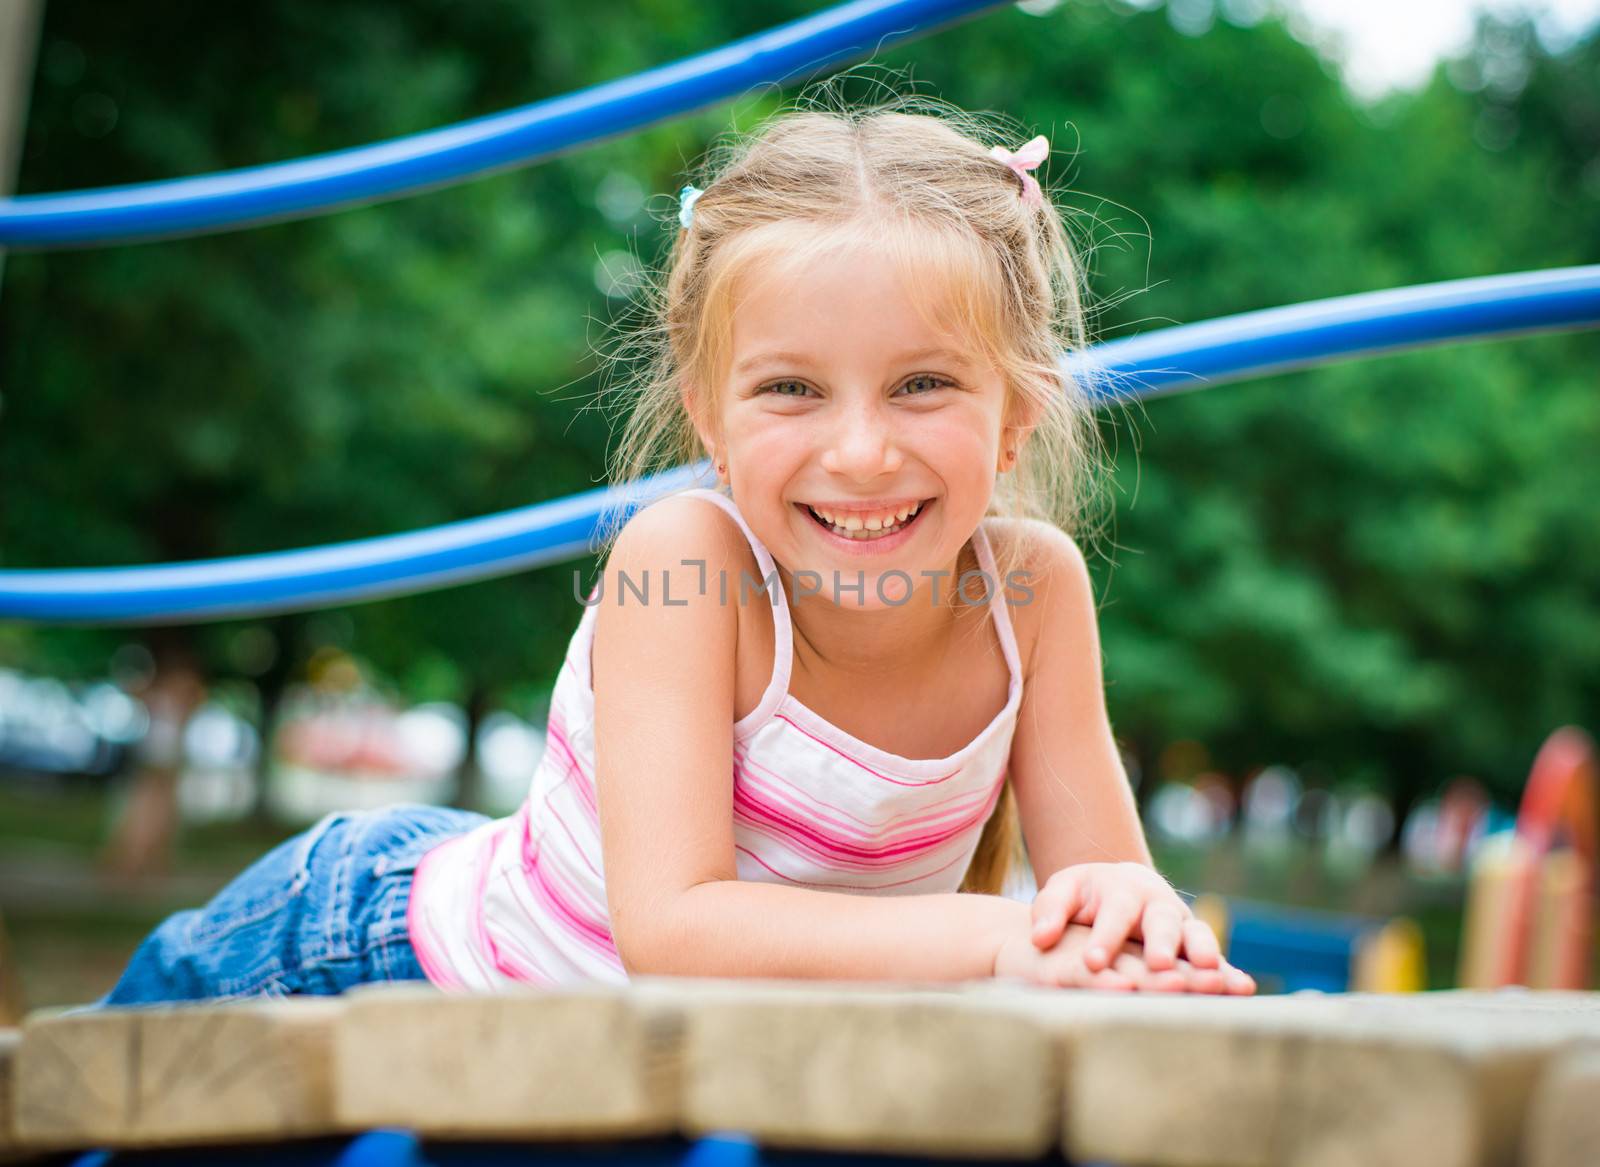 cute smiling little girl on a playground